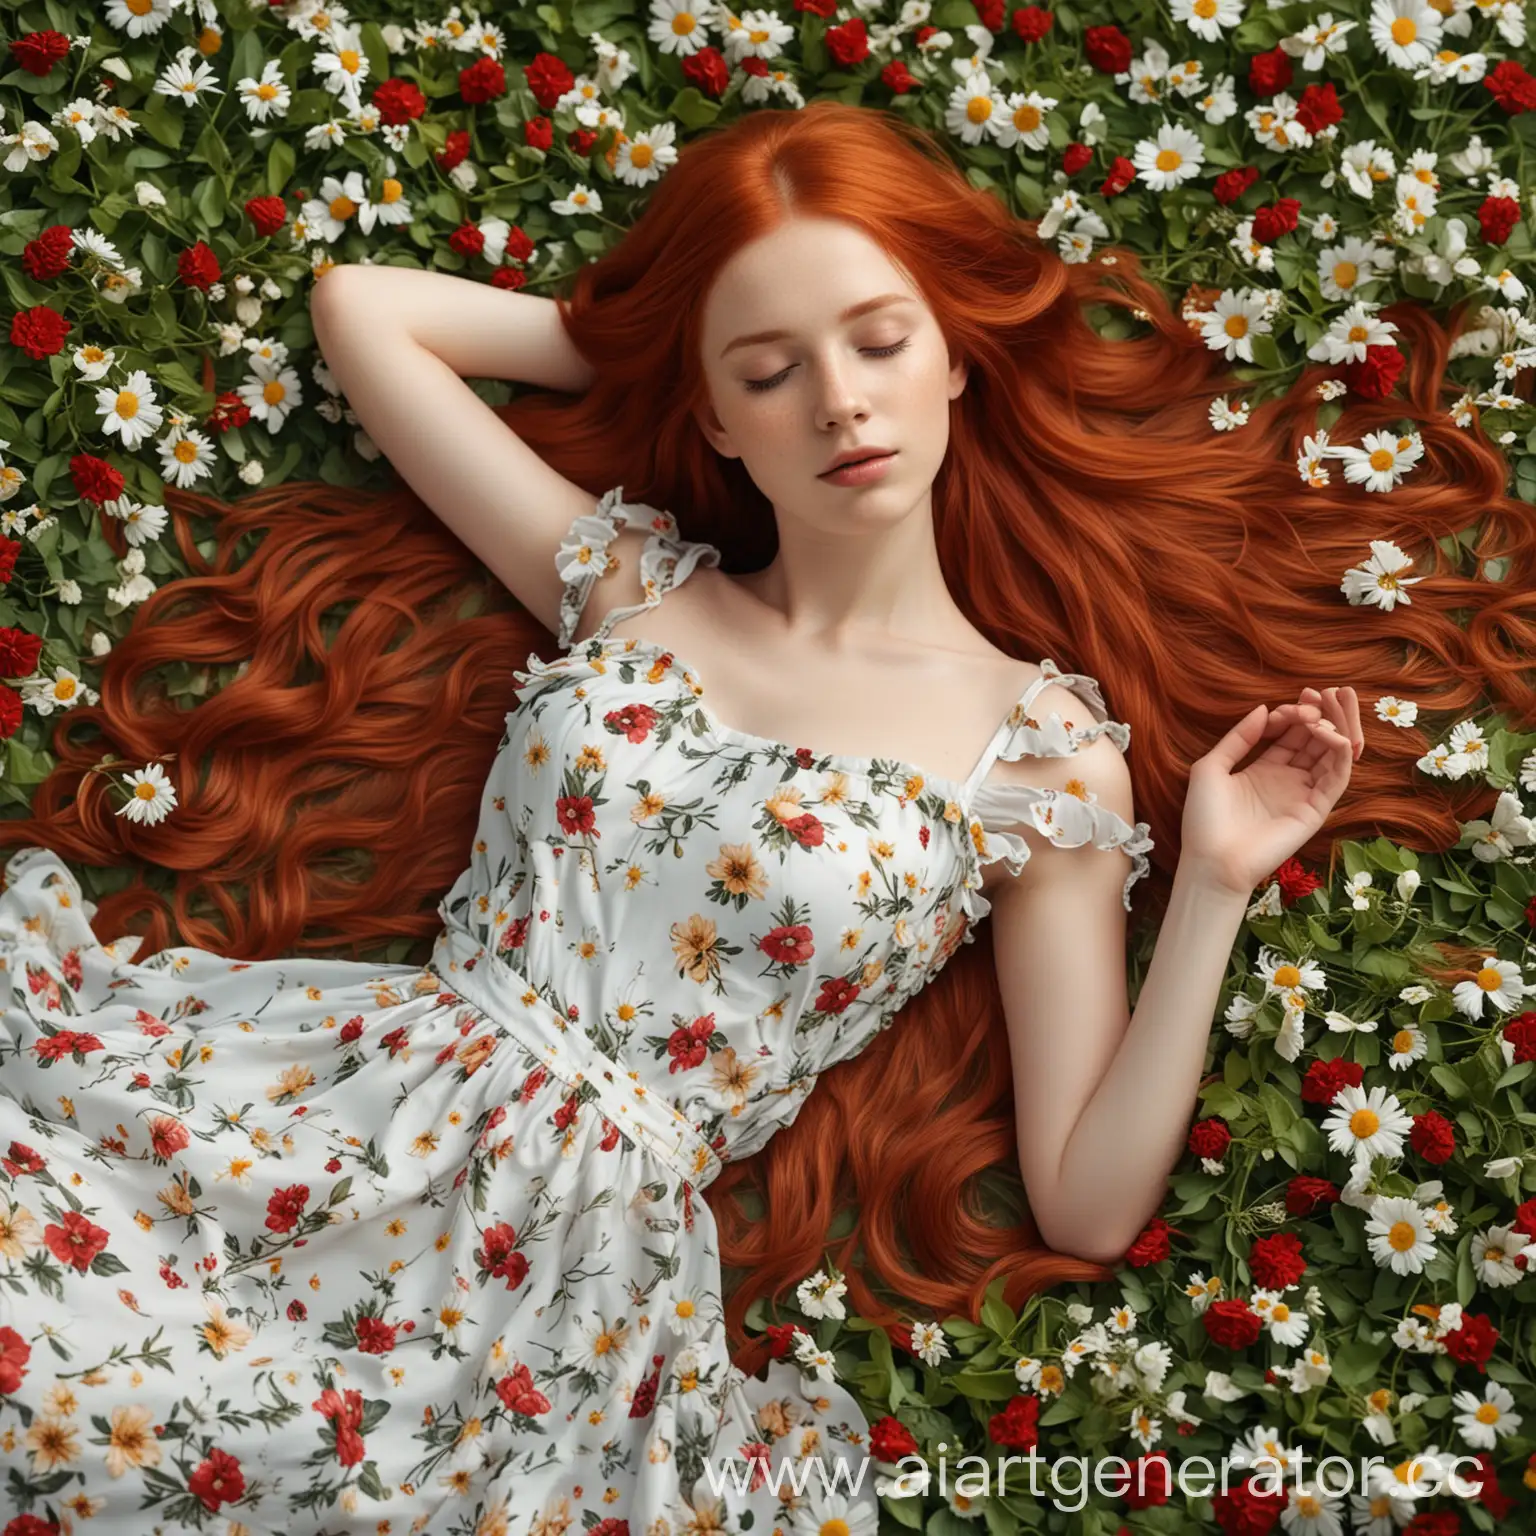 Girl-with-Long-Red-Hair-Lying-in-Flowers-in-Light-Dress-Realistic-Art